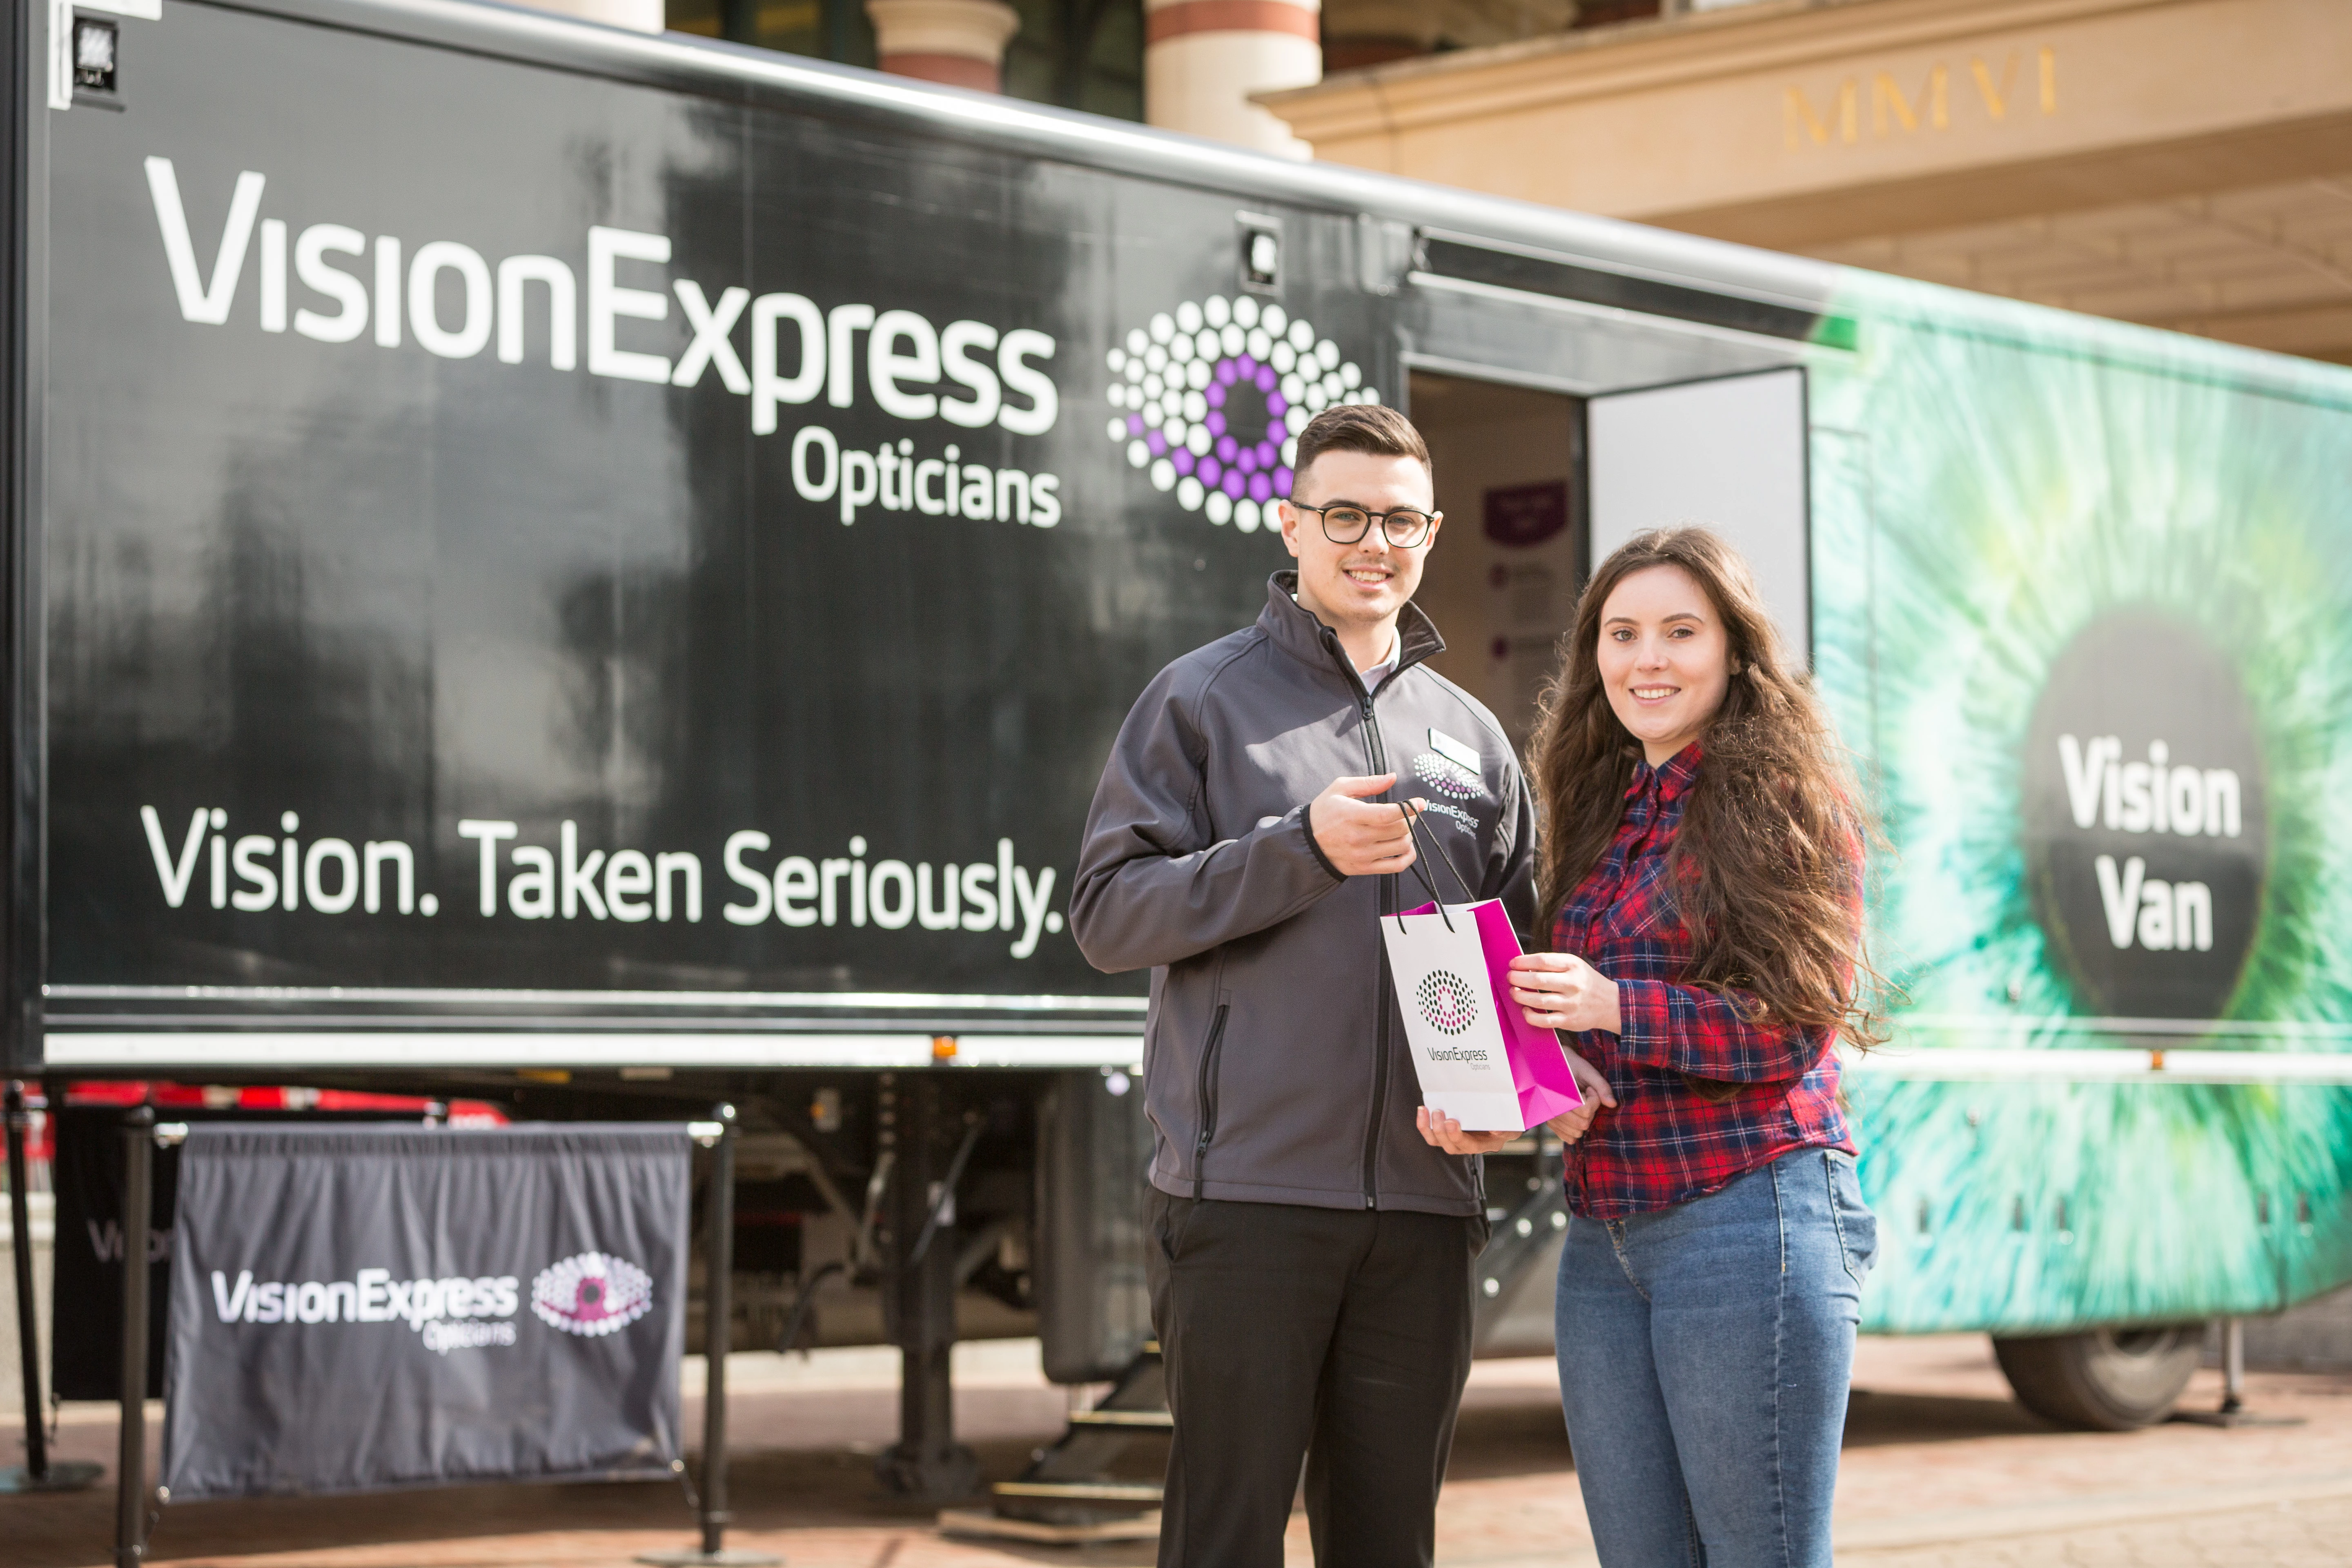 The Vision Van at intu Trafford Centre in Manchester. L-R: Vision Express optical assistant Owen Bairstow and visitor Jay Anderson.